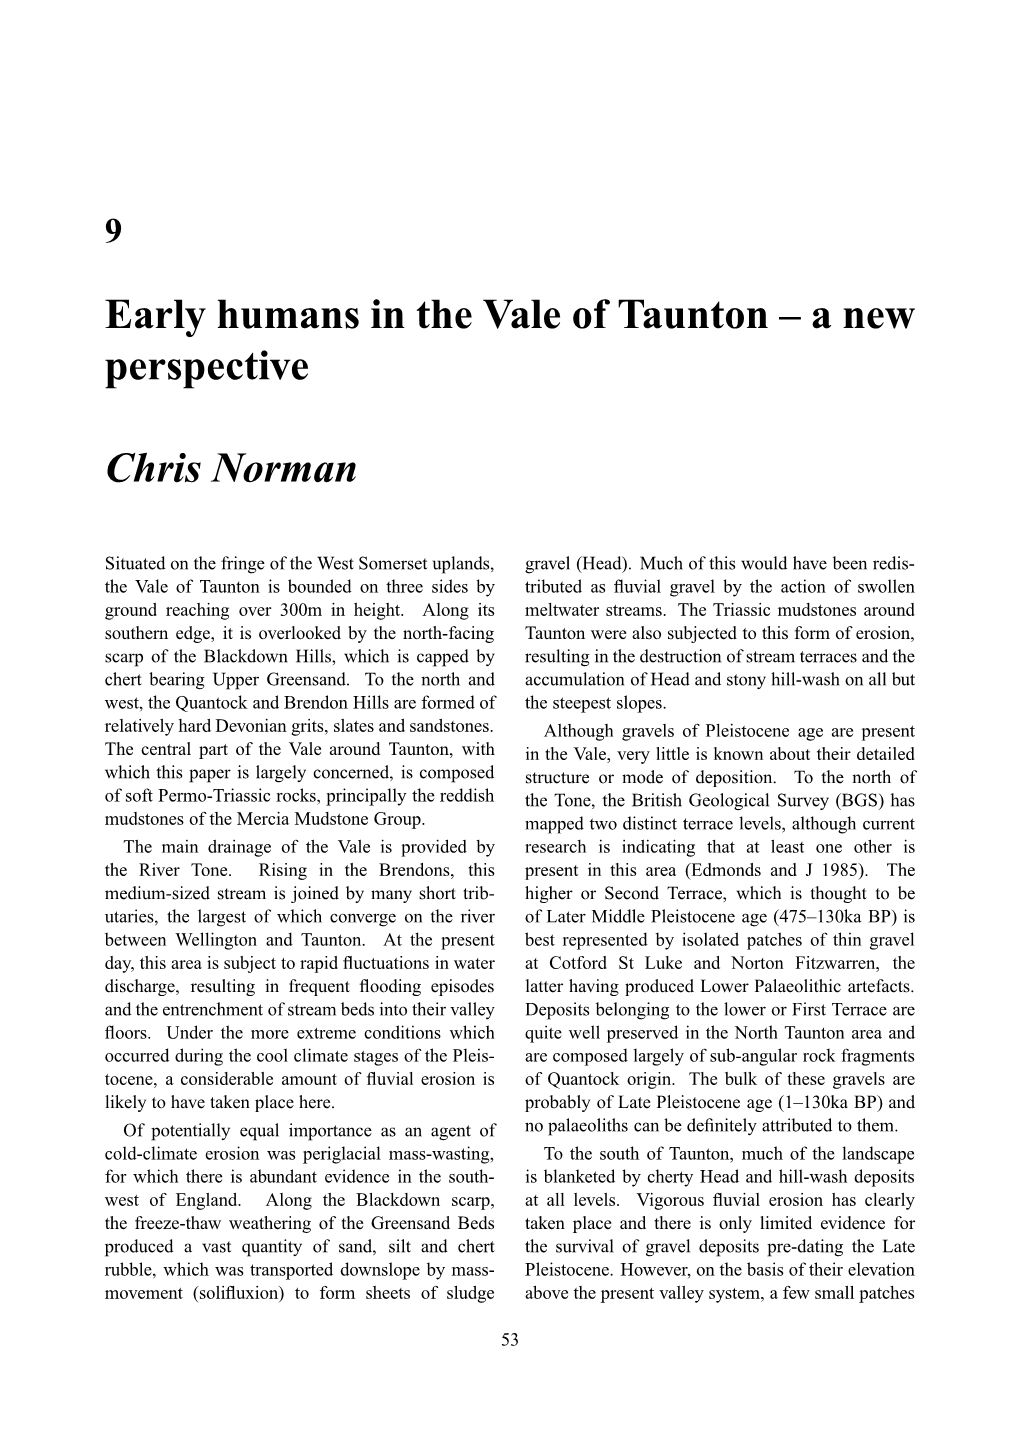 Early Humans in the Vale of Taunton – a New Perspective